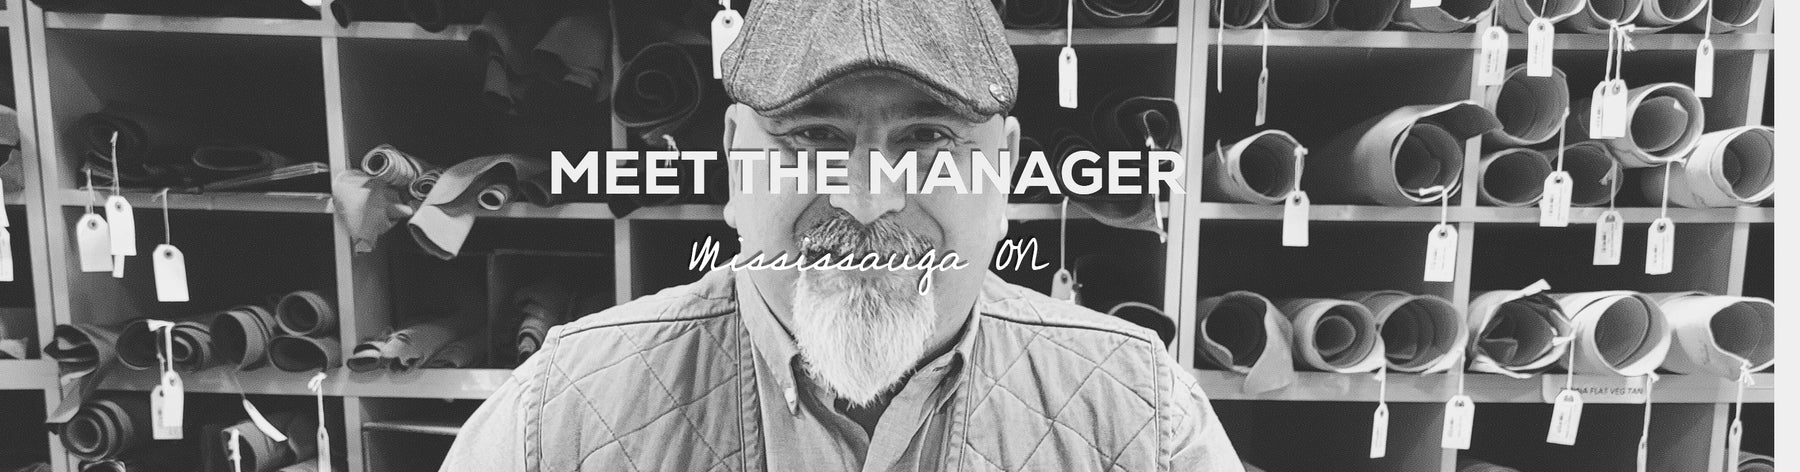 Meet the Manager - Ed D @ Store 701